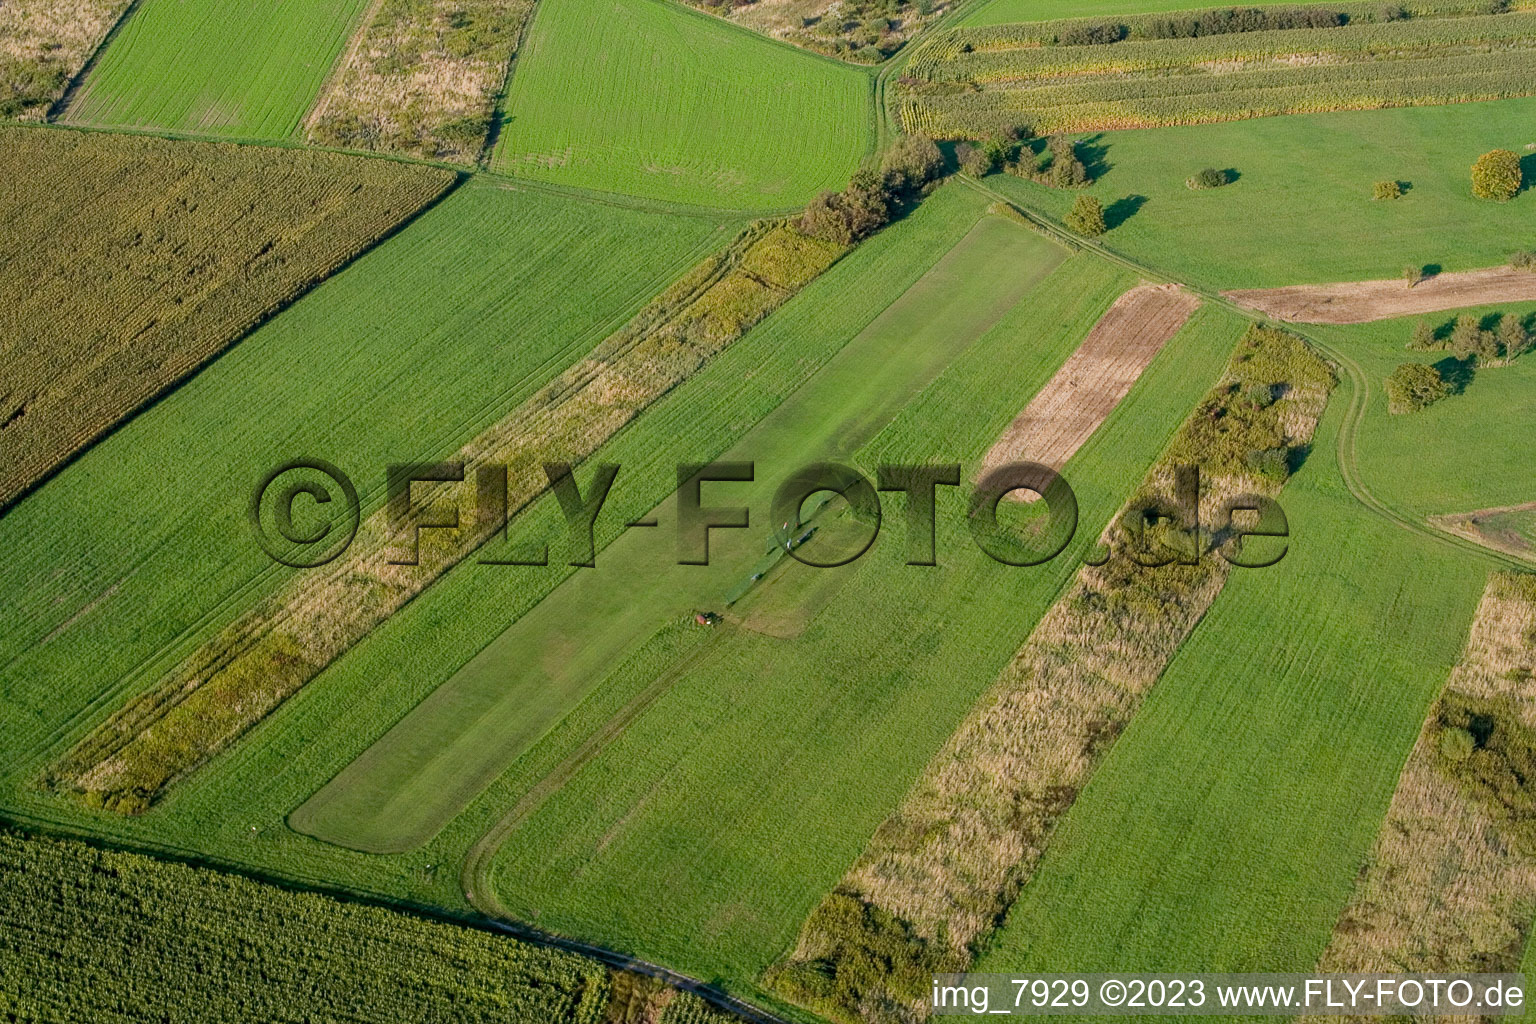 Aerial view of Model airfield in Neuburg in the state Rhineland-Palatinate, Germany